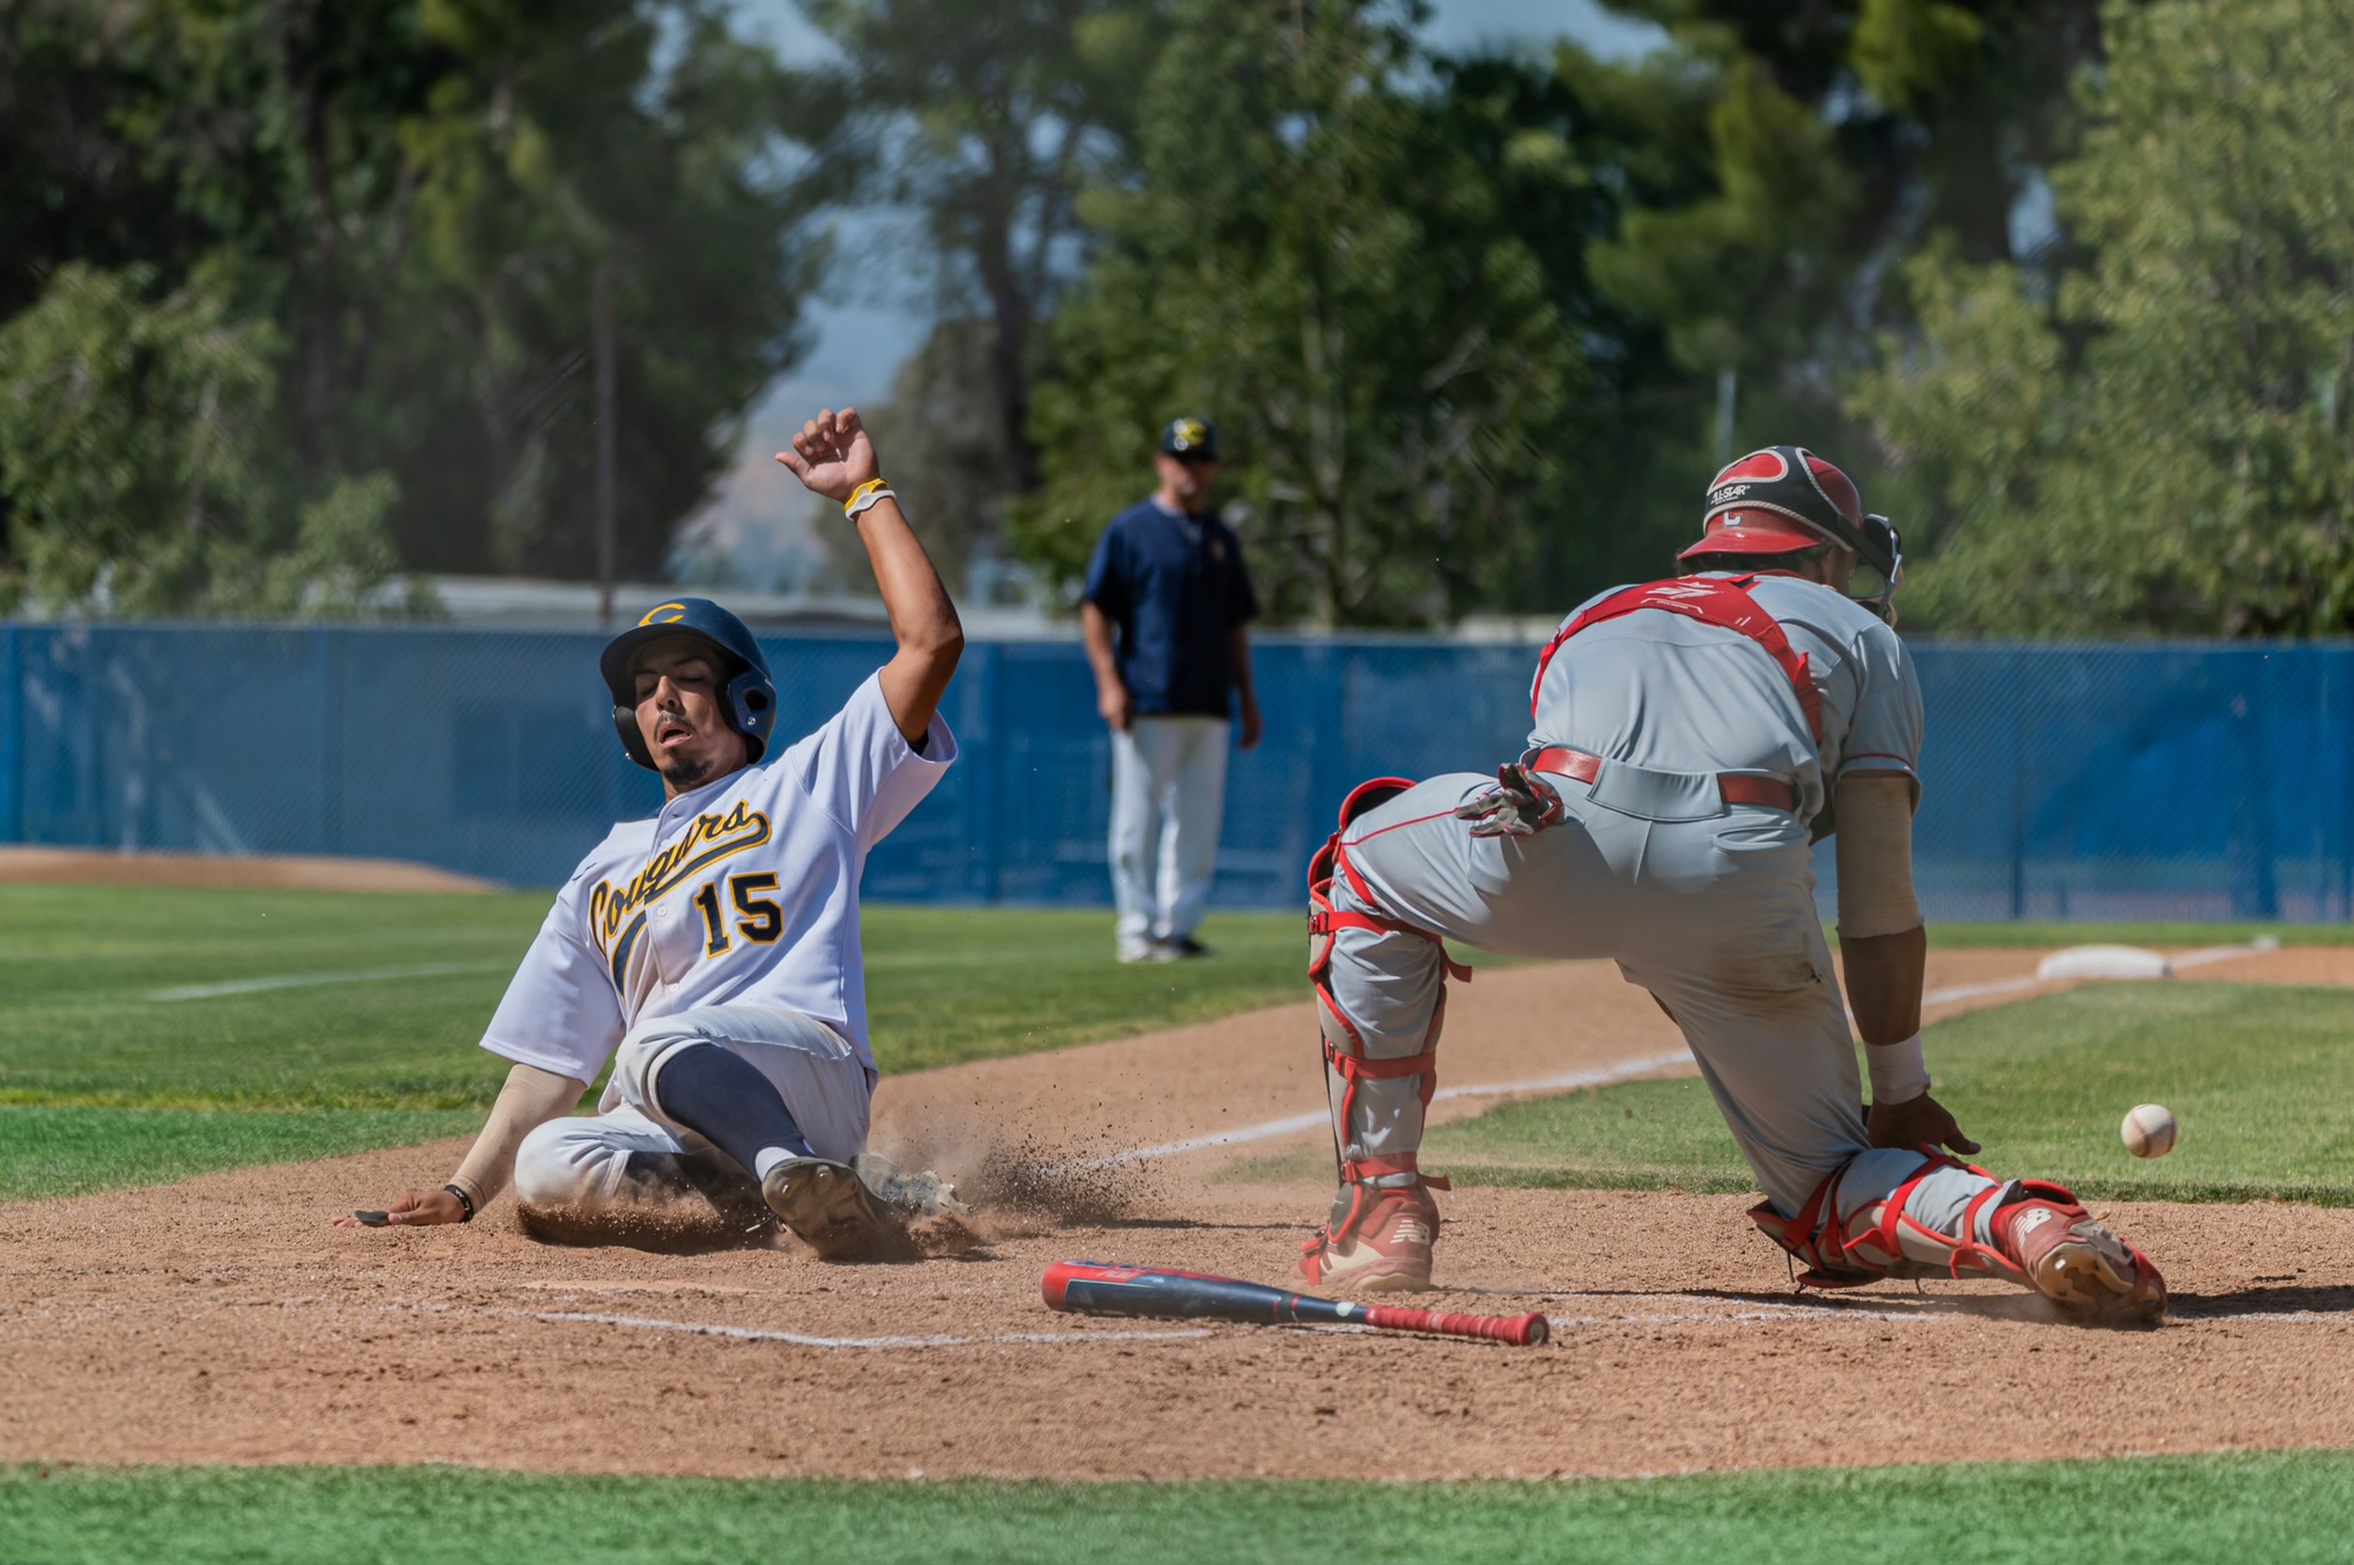 College of the Canyons baseball vs. Bakersfield on April 29, 2022.